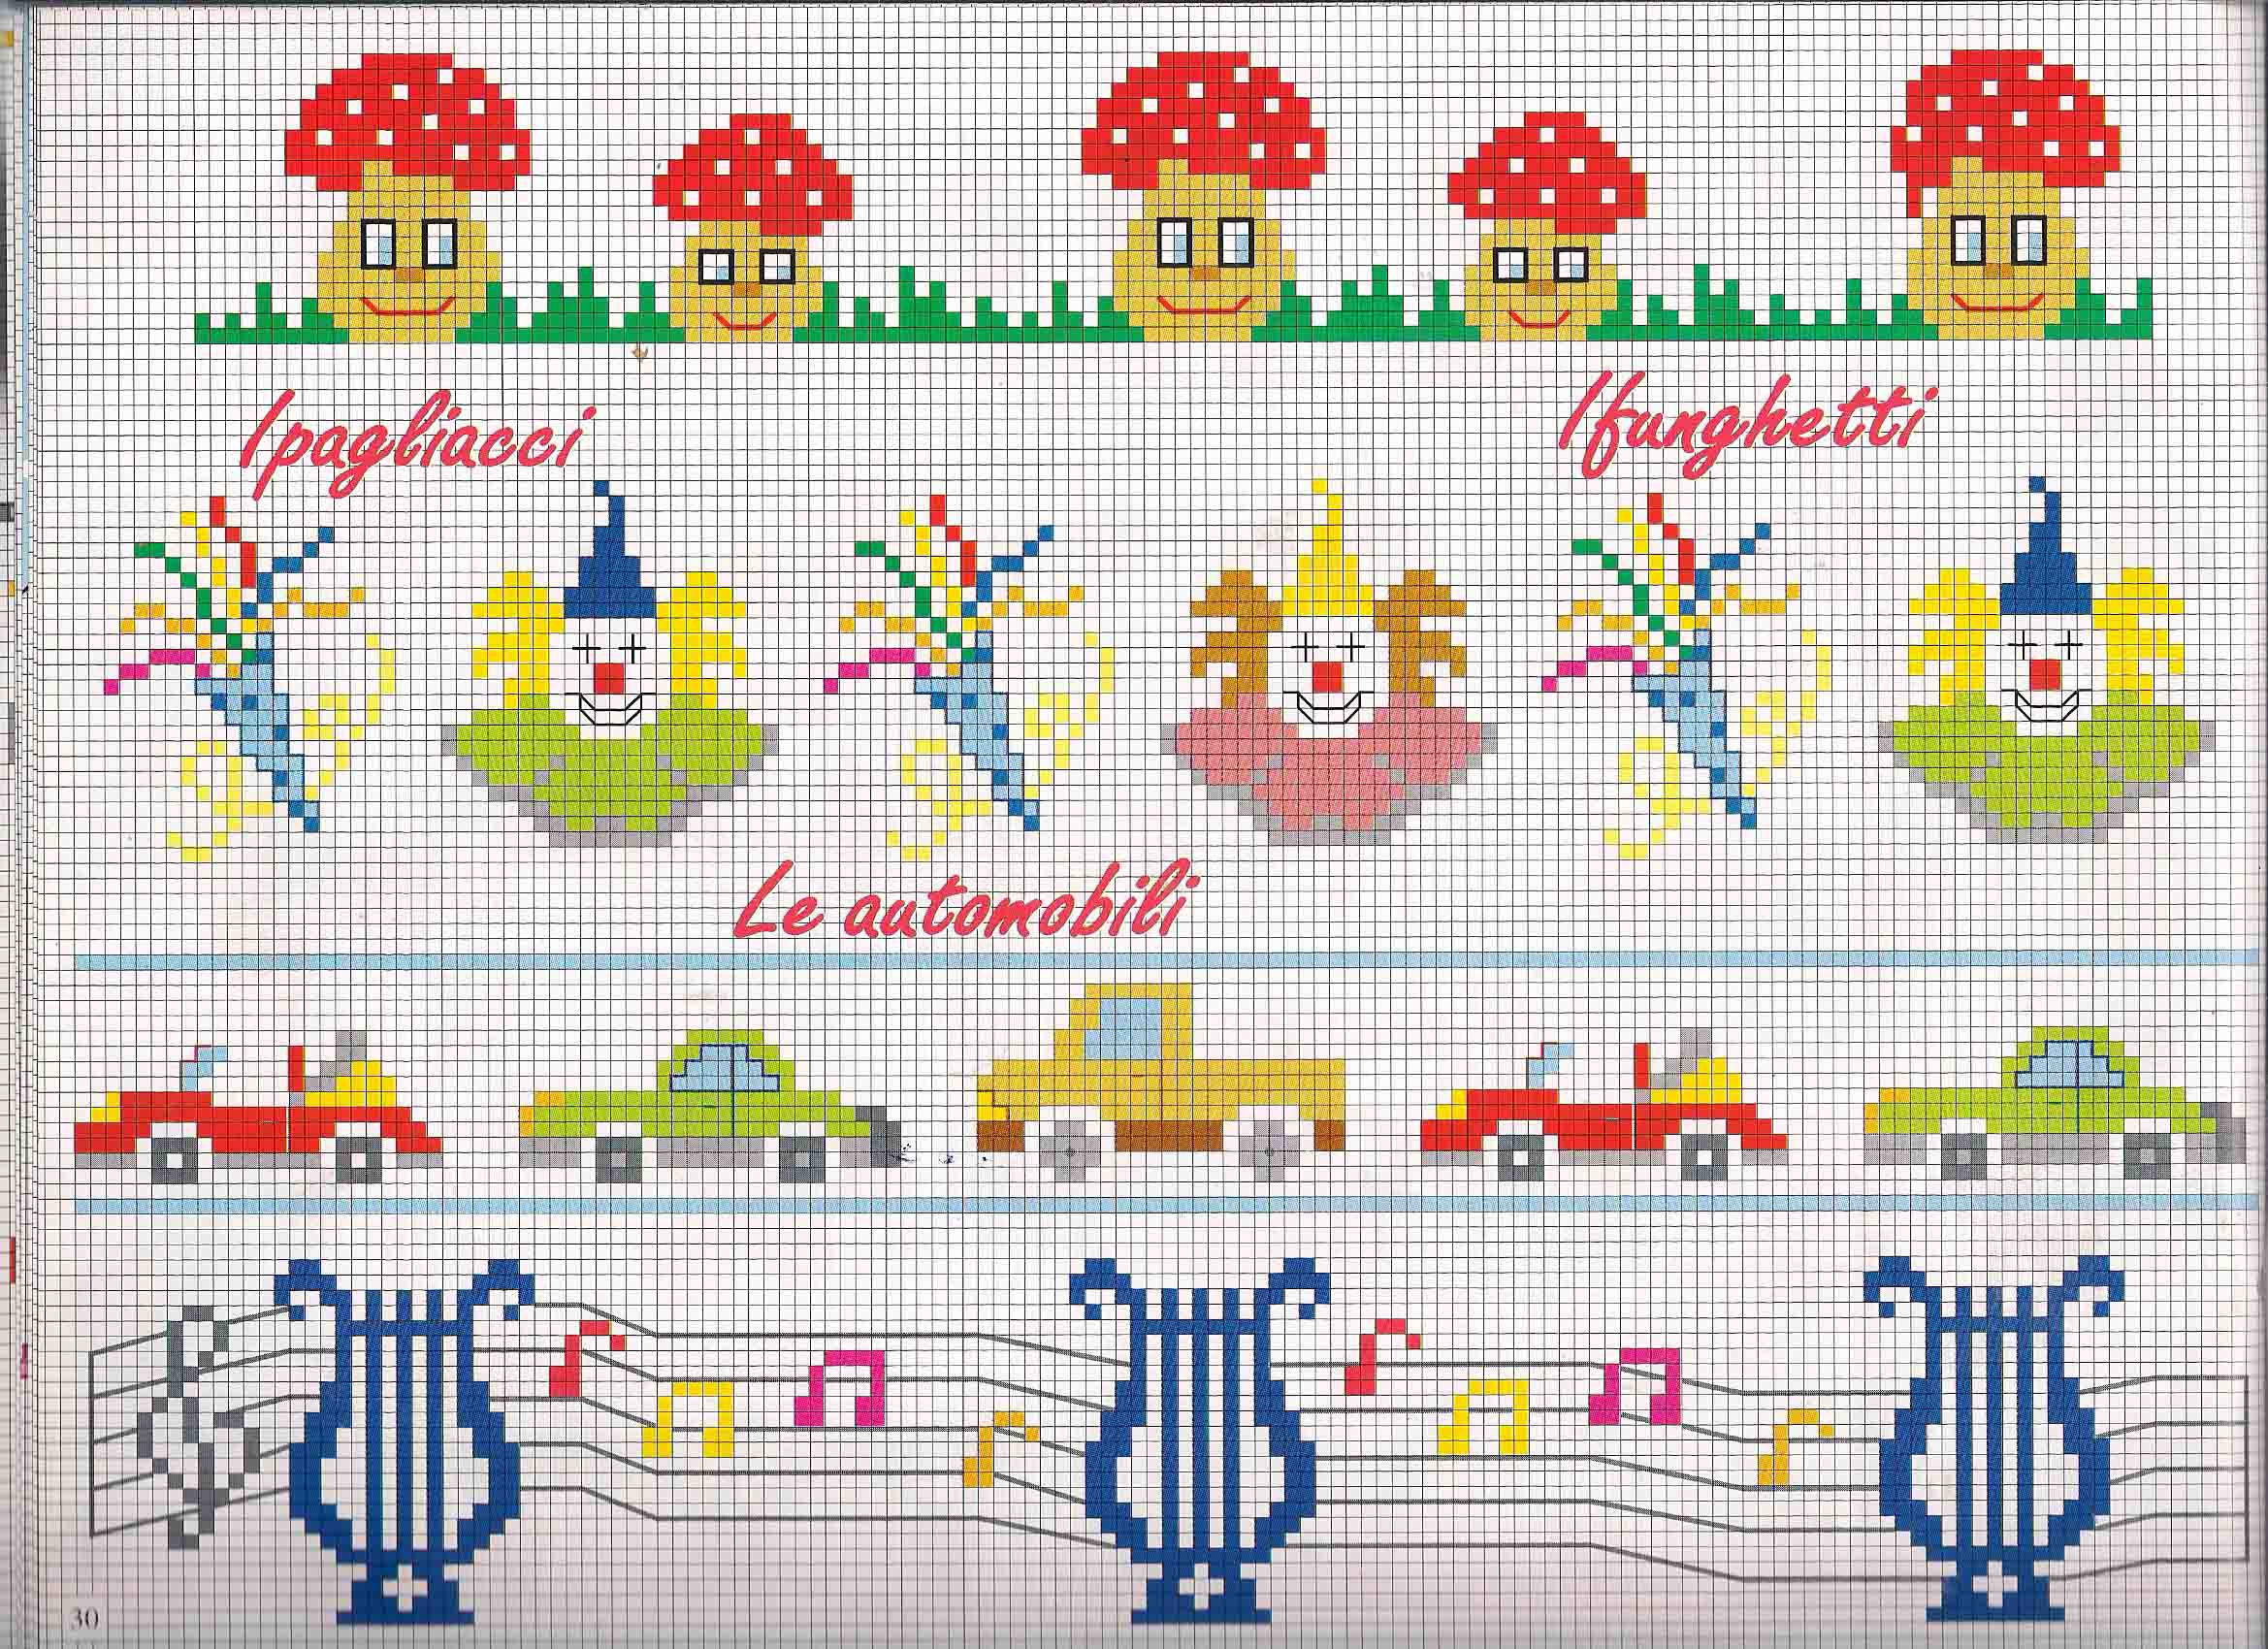 Cross stitch borders with clowns and red mushrooms